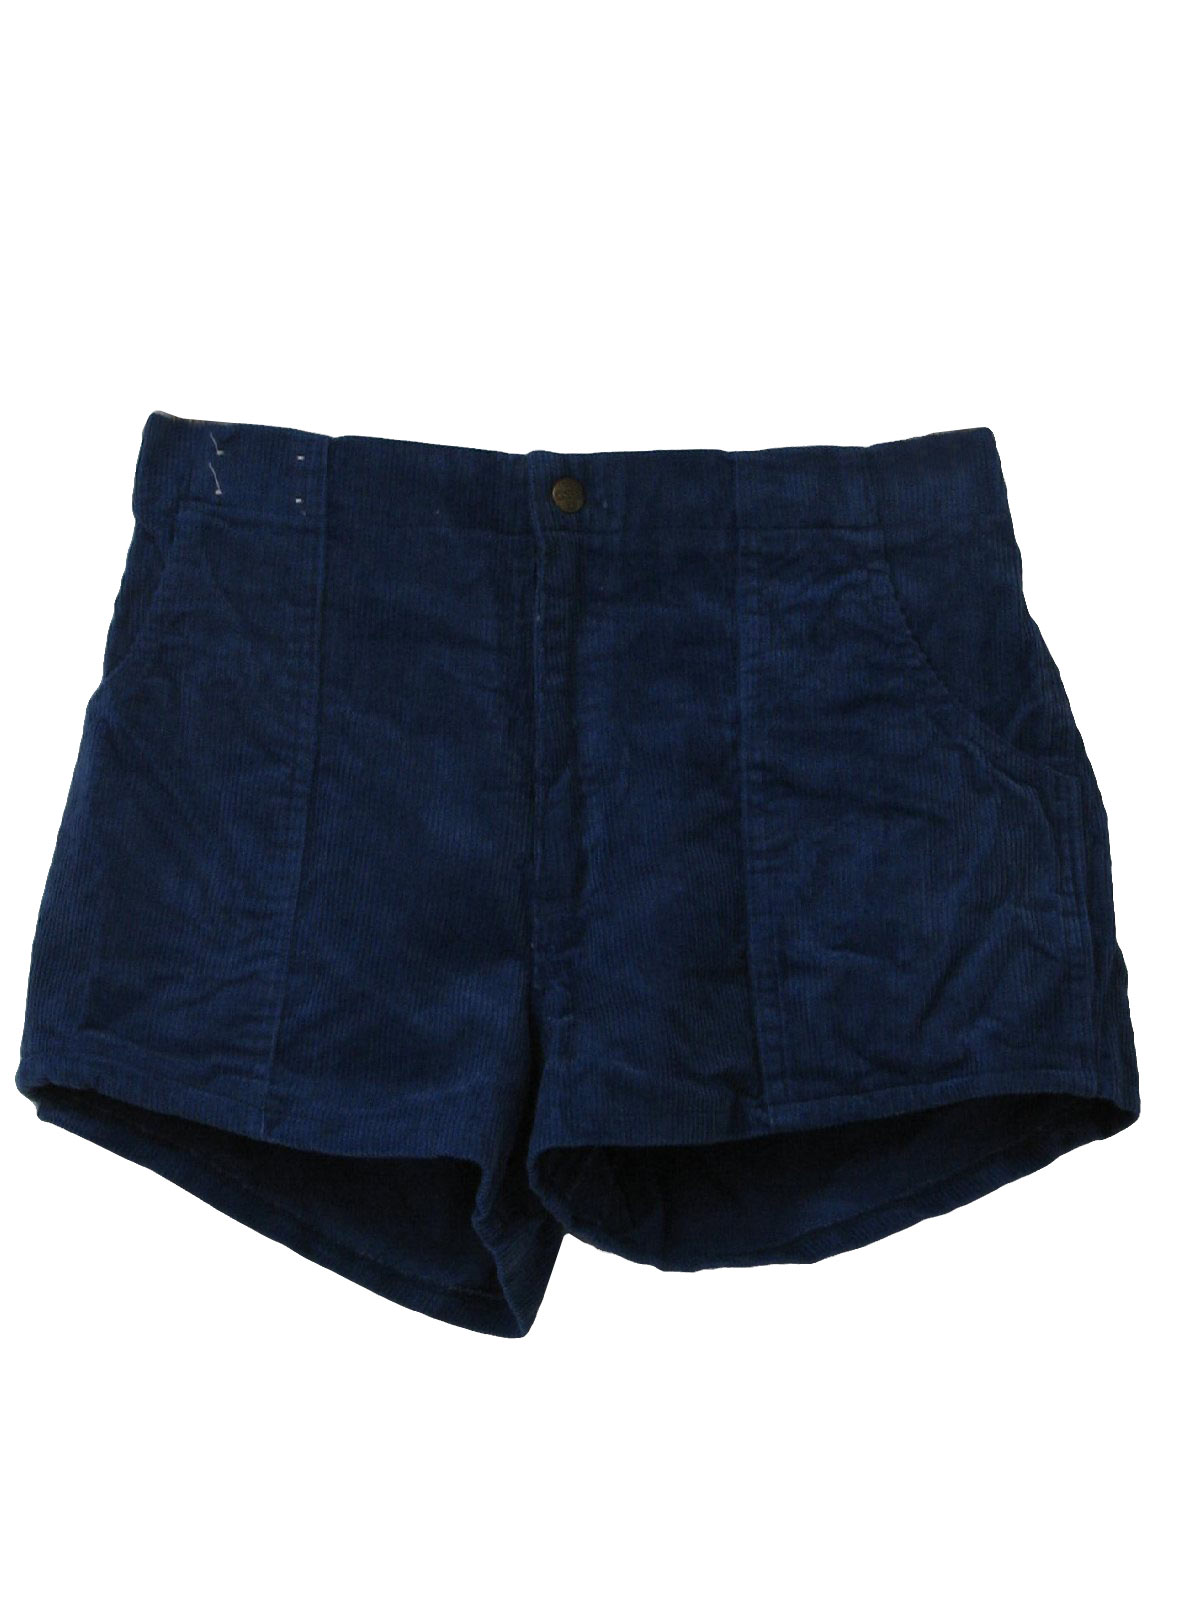 Retro 1970s Shorts: 70s -Weeds- Mens blue cotton and polyester blend ...